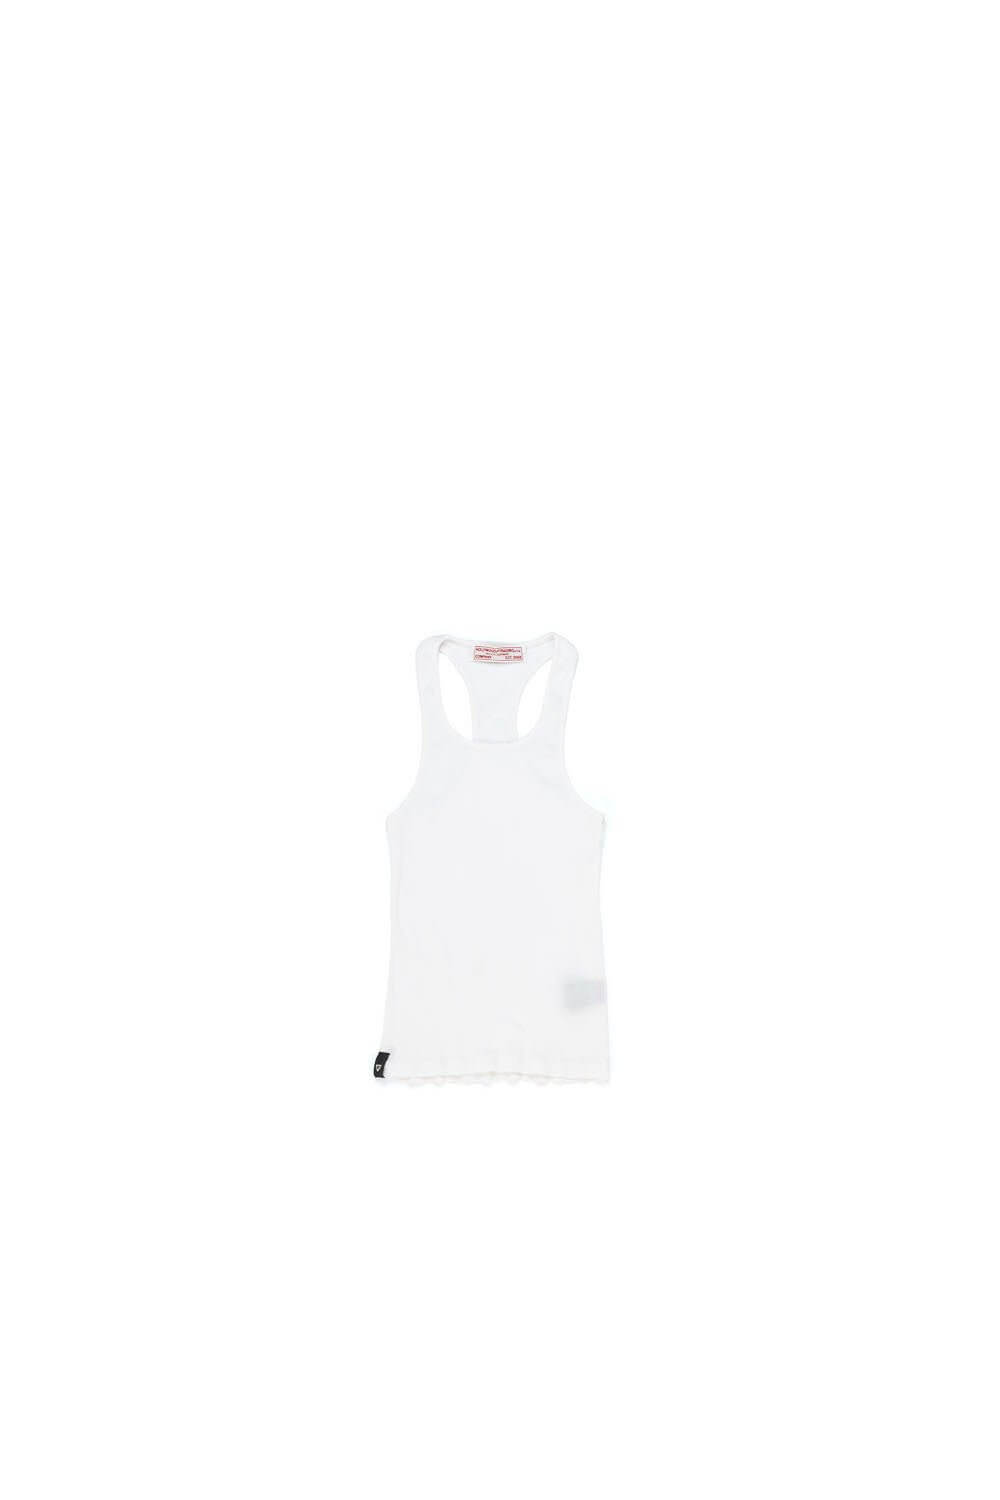 HTC LIL LOGO TANK Tank top with frontal htc tag. Composition: 100% Cotton HTC LOS ANGELES